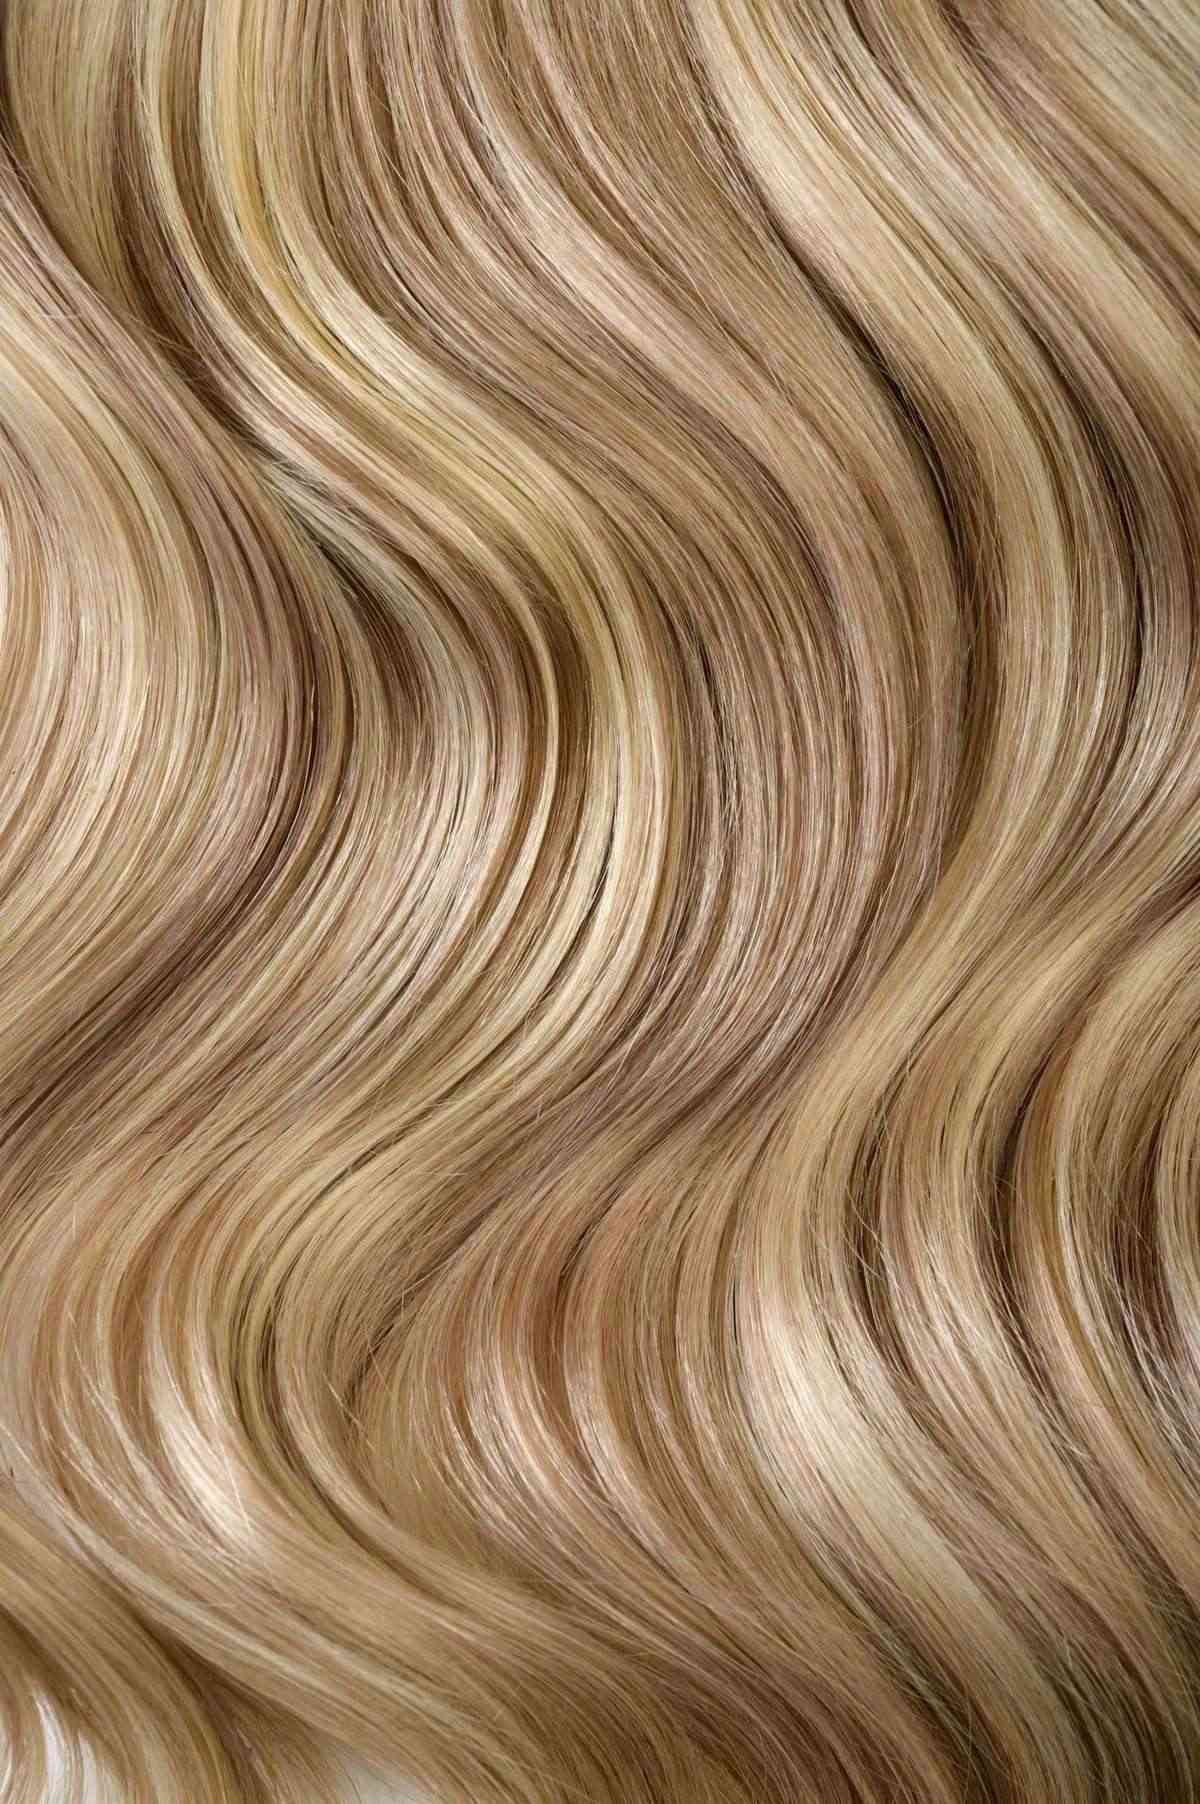 #18/613 Ash Blonde Highlights Classic Halo Hair Extensions